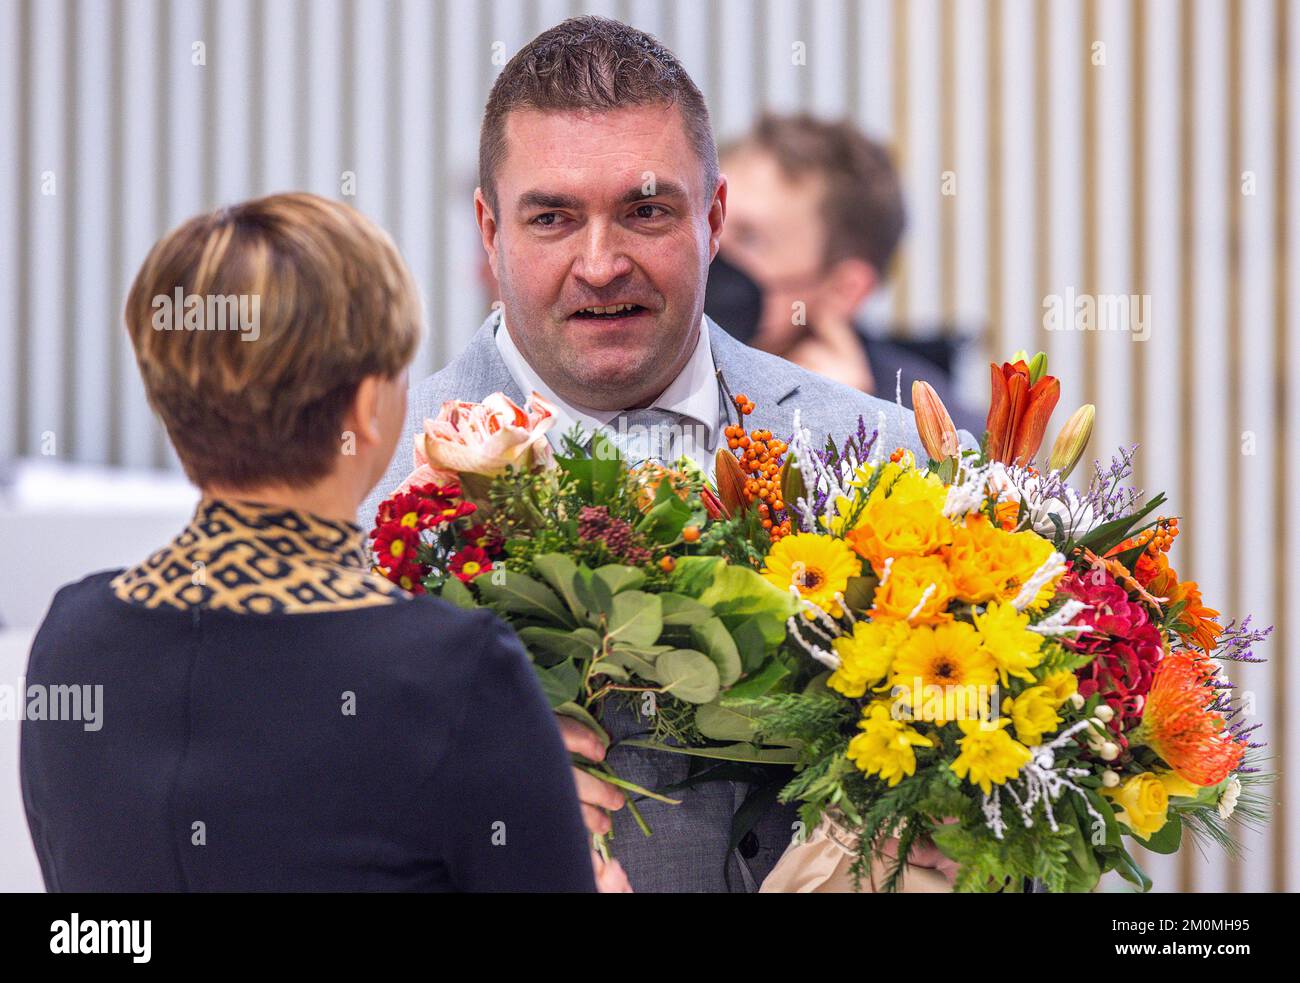 07 December 2022, Mecklenburg-Western Pomerania, Schwerin: Lawyer Sebastian Schmidt receives a bouquet of flowers from Jeannine Rösler, leader of the Left Party in the state parliament of Mecklenburg-Western Pomerania, after his election as the new data protection commissioner for Mecklenburg-Western Pomerania. Schmidt, who had previously worked as a staff member of the Left faction in the state parliament, received 43 of the 71 votes cast in a secret ballot. The members of the Schwerin state parliament are starting the last week of sessions in 2022, with numerous bills before the parliamentar Stock Photo